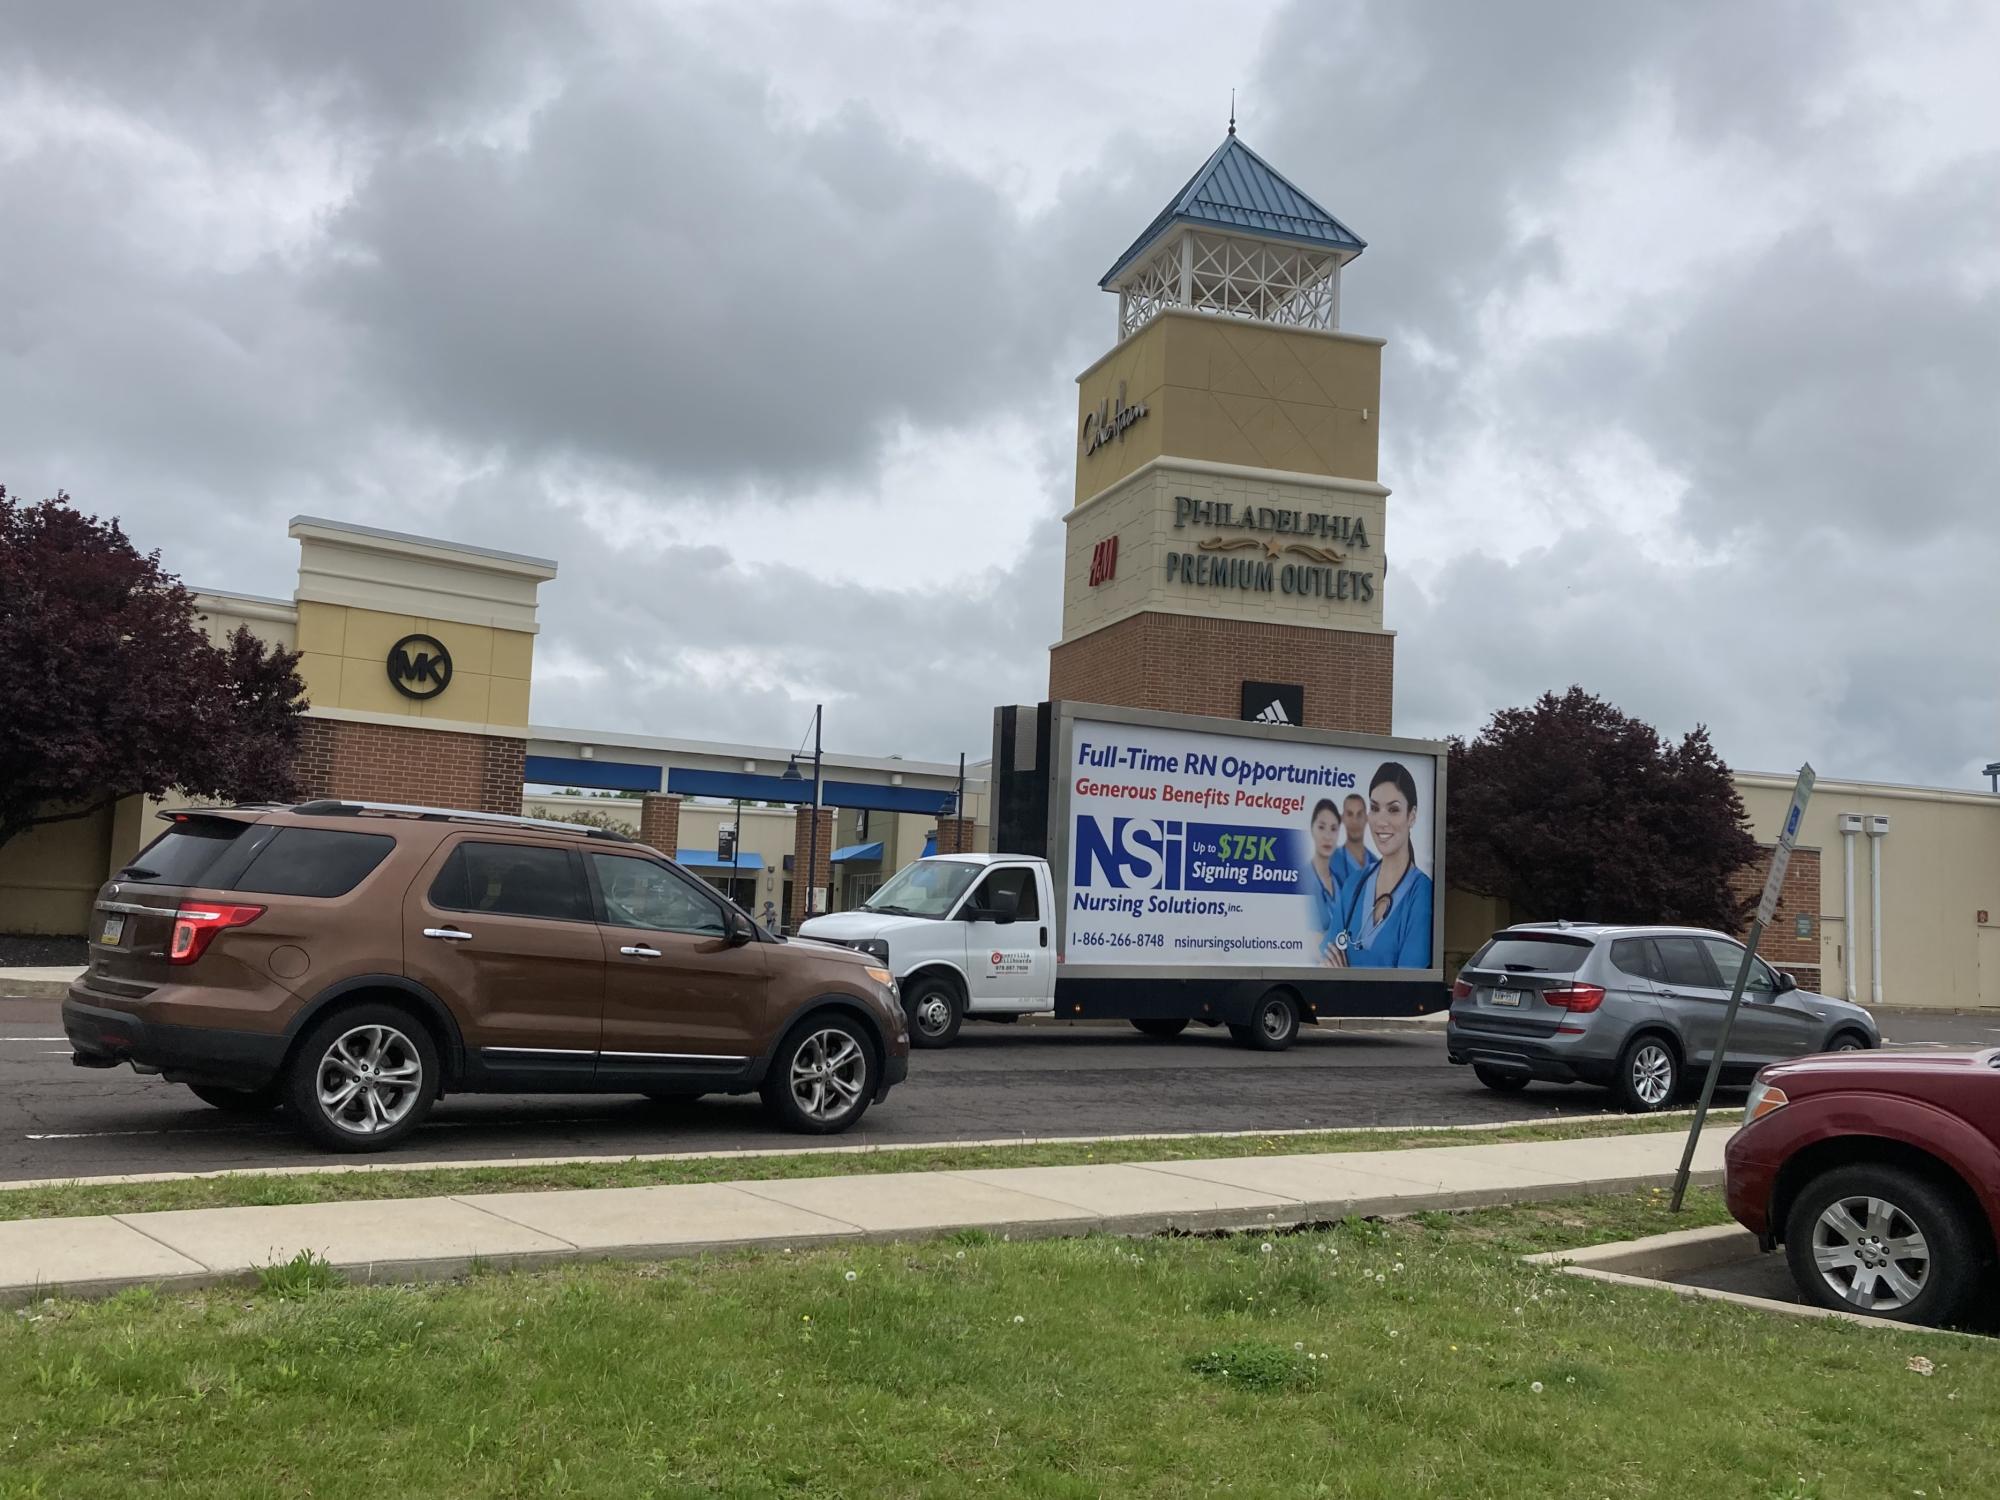 Mobile billboard at Pennsylvania Premium Outlets